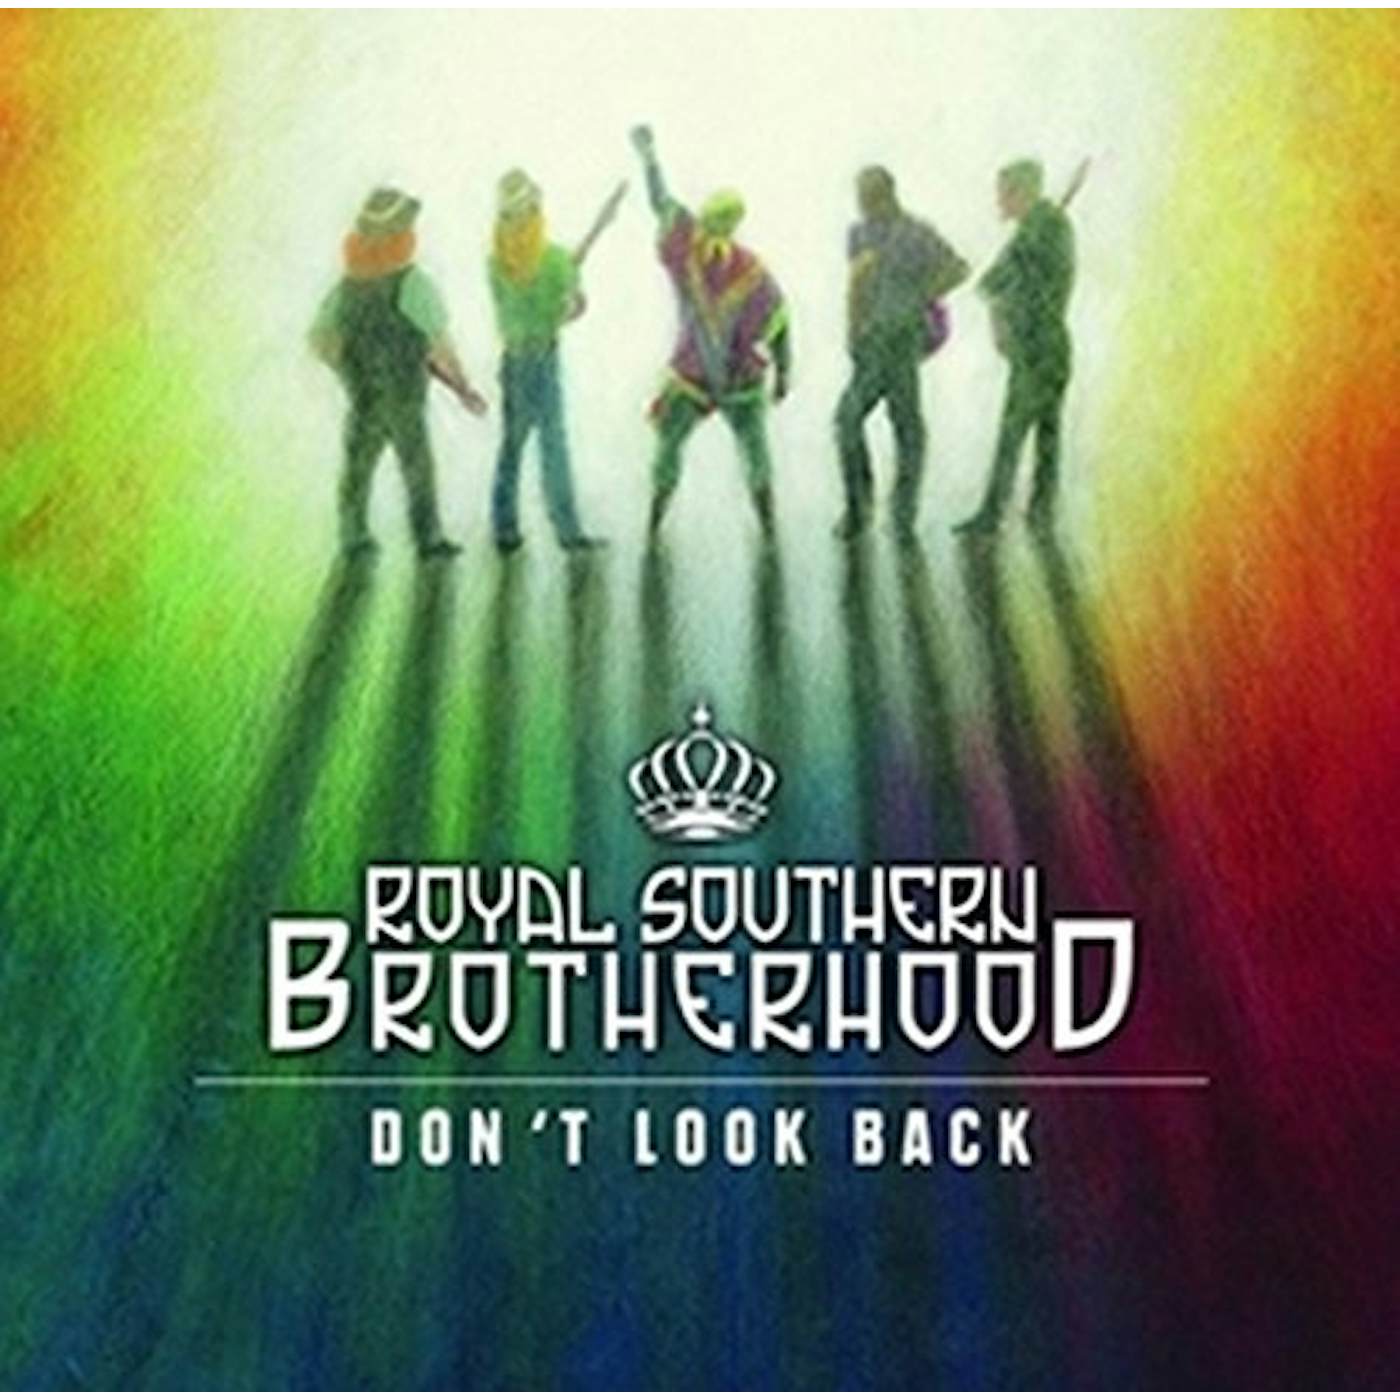 Royal Southern Brotherhood DON'T LOOK BACK - THE MUSCLE SHOALS SESS CD